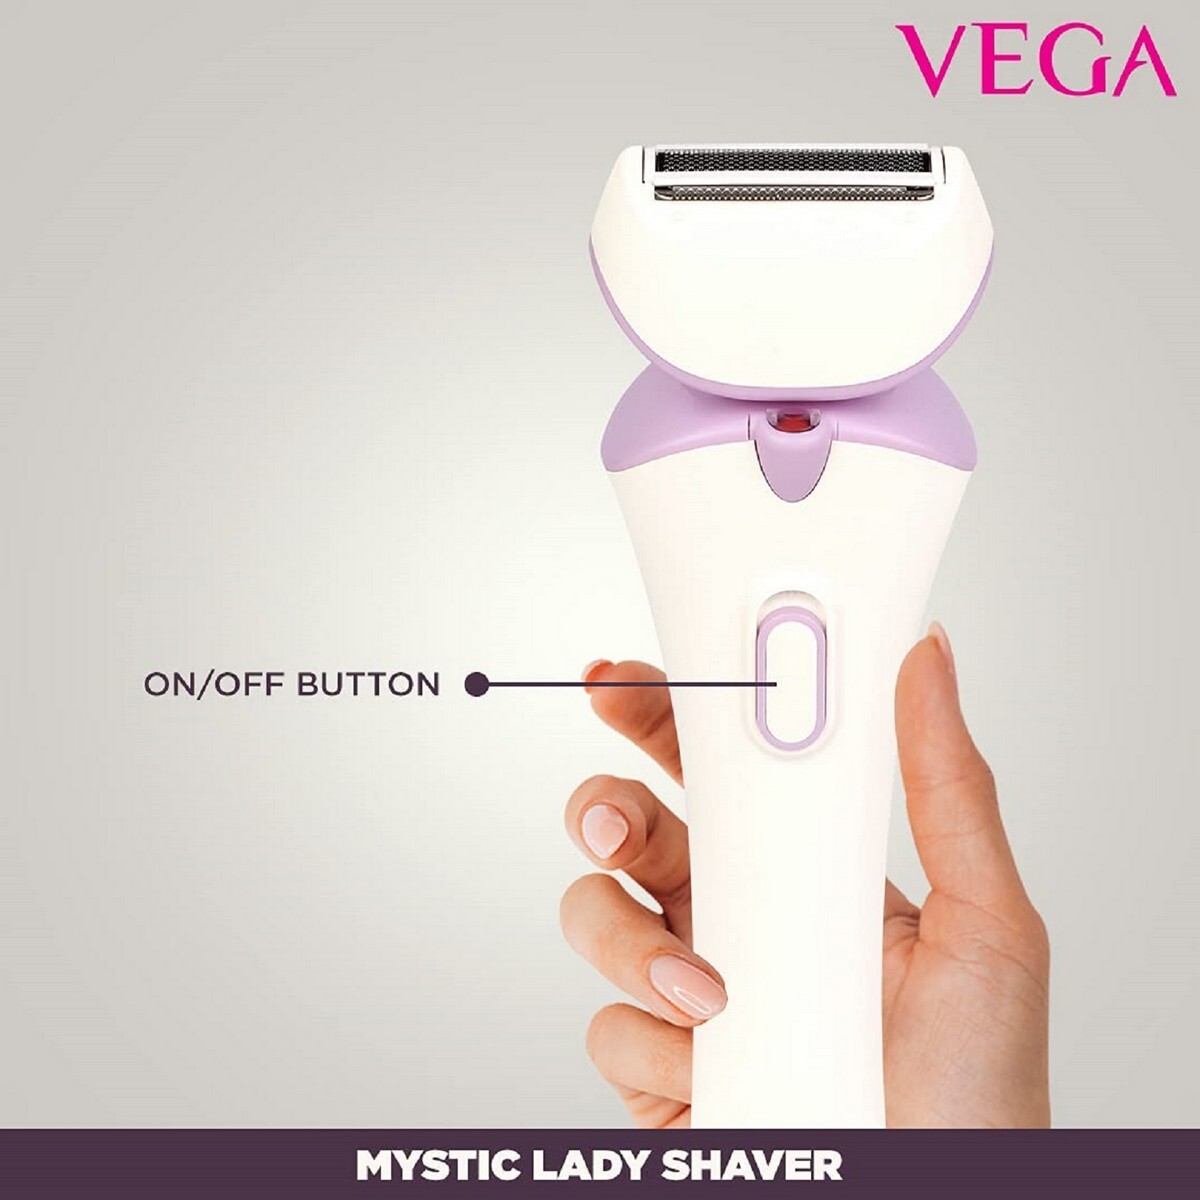 VEGA Mystic Lady Shaver For Women, 90 Mins Runtime with Quick Charge, IPX 6 Waterproof And Cord & Cordless Use